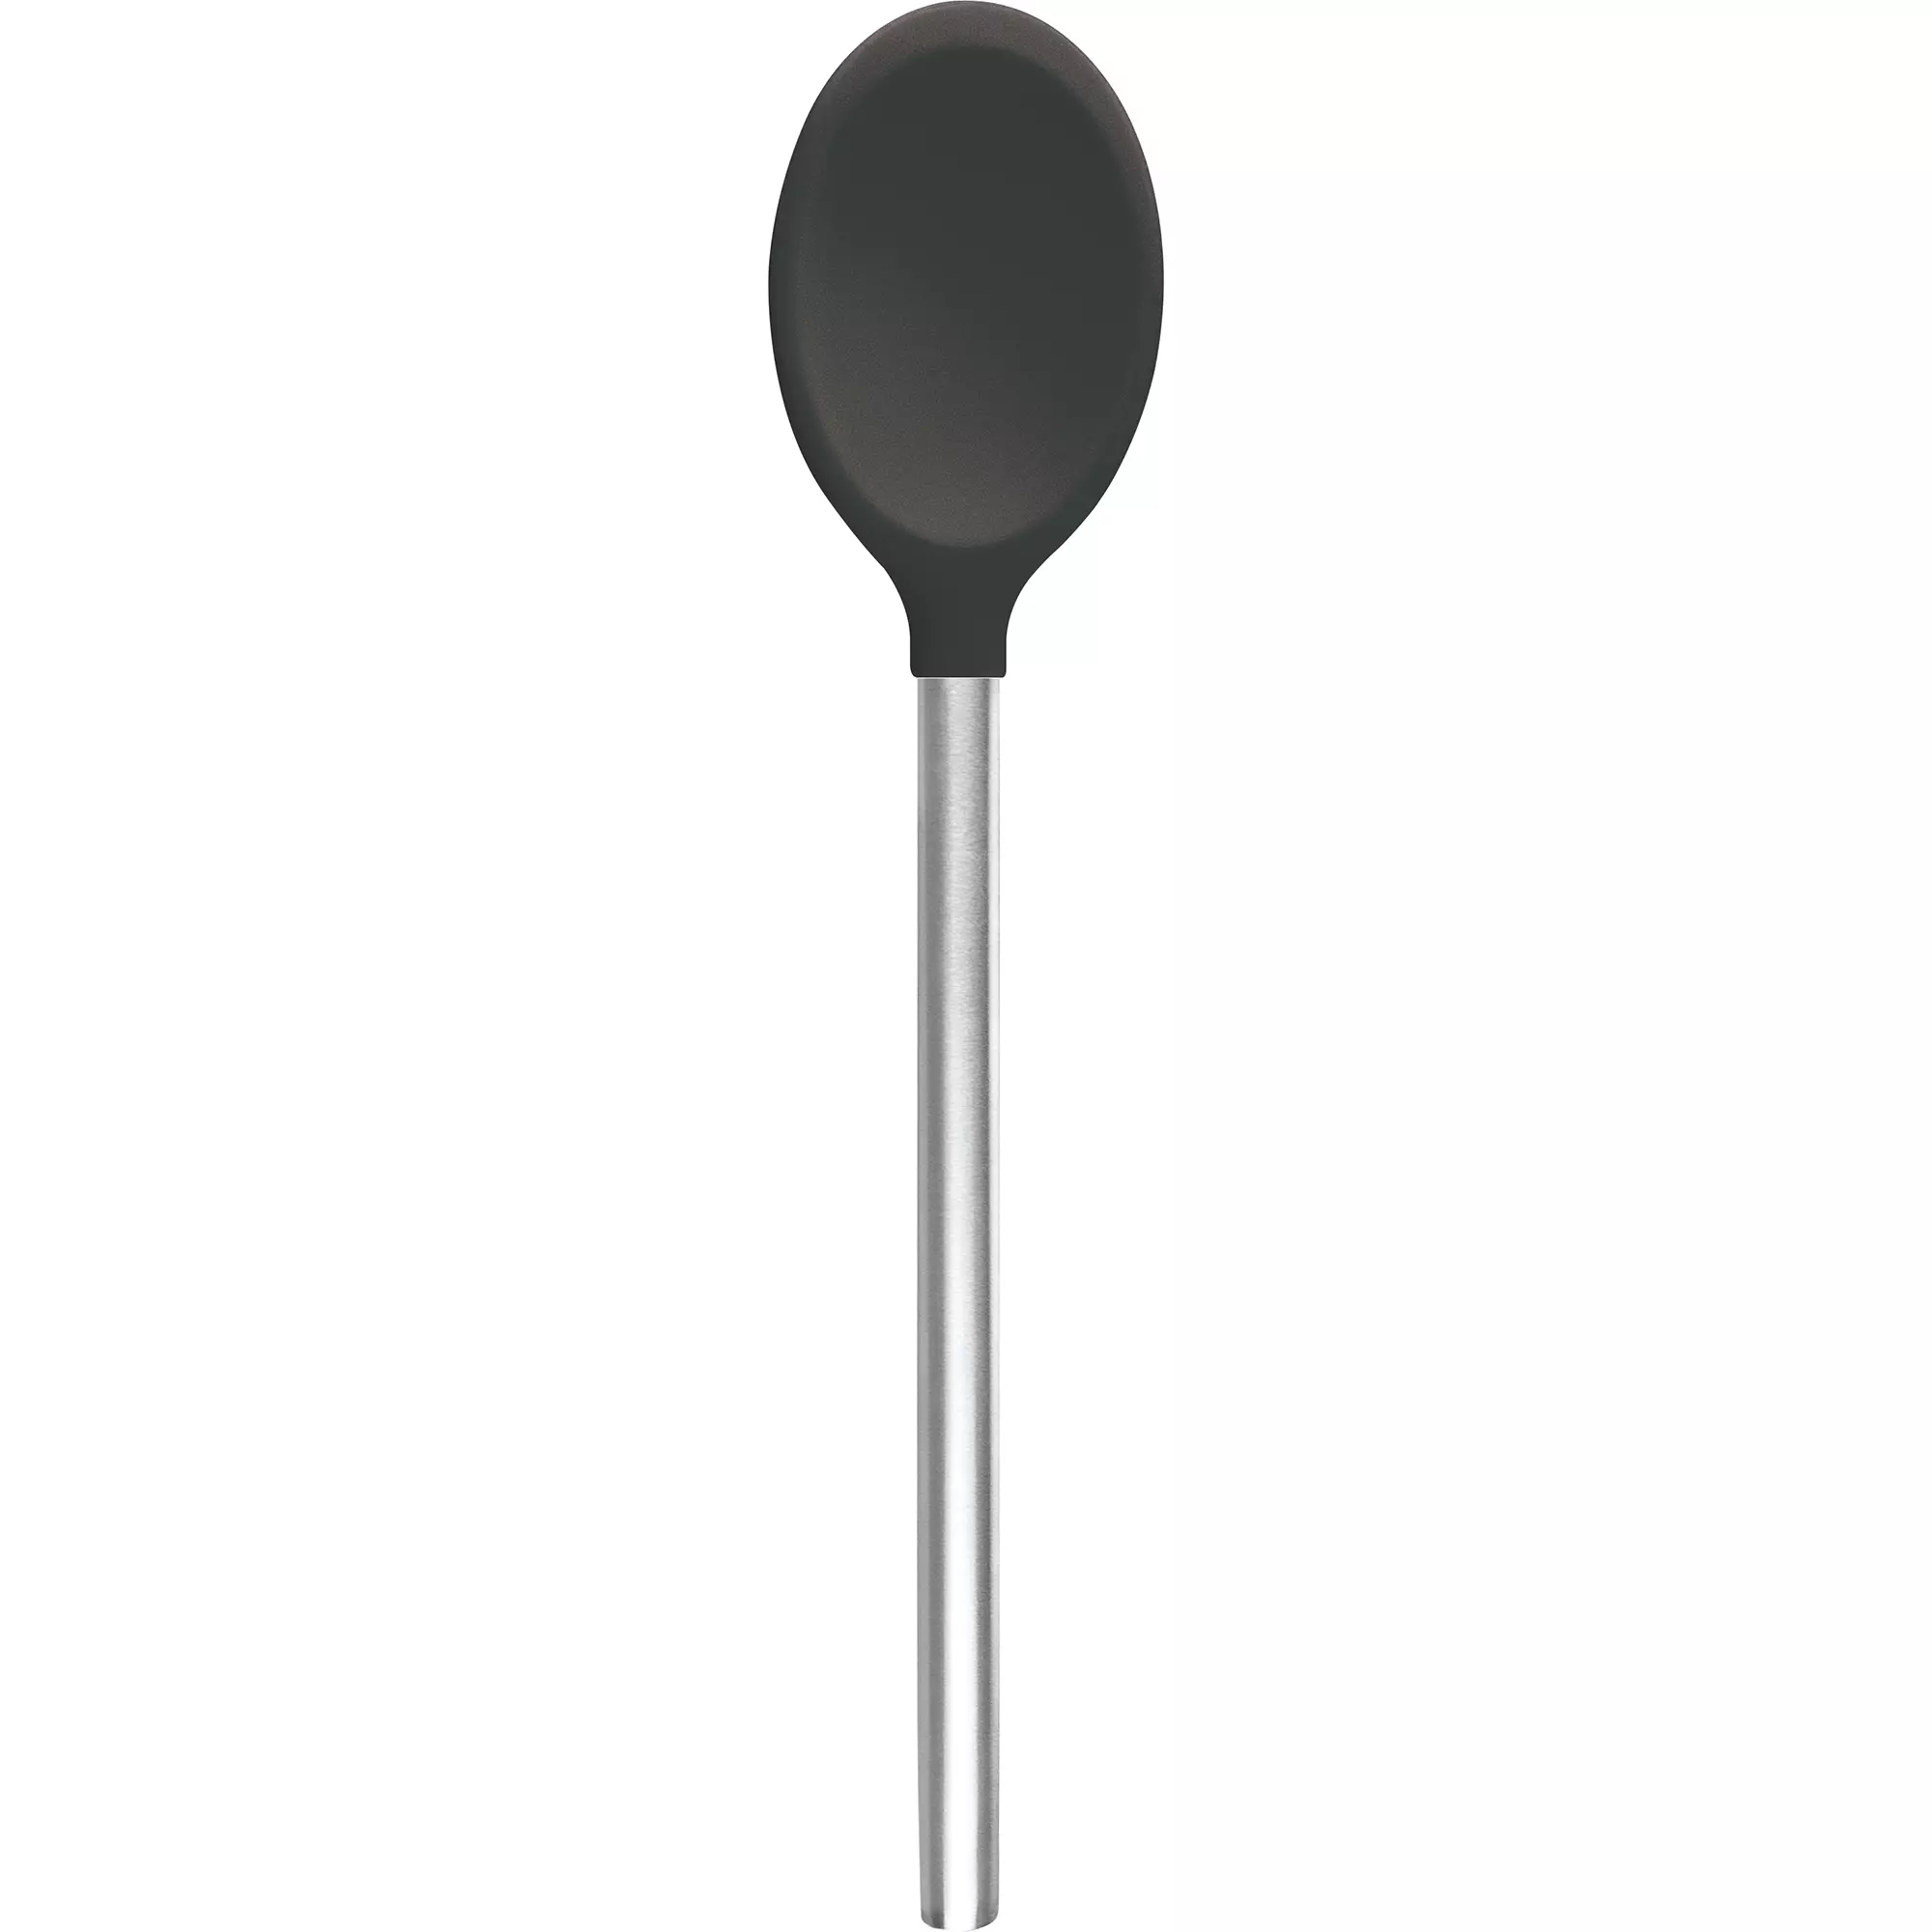 https://www.momjunction.com/wp-content/uploads/product-images/tovolo-silicone-slotted-spoon_afl2591.jpg.webp